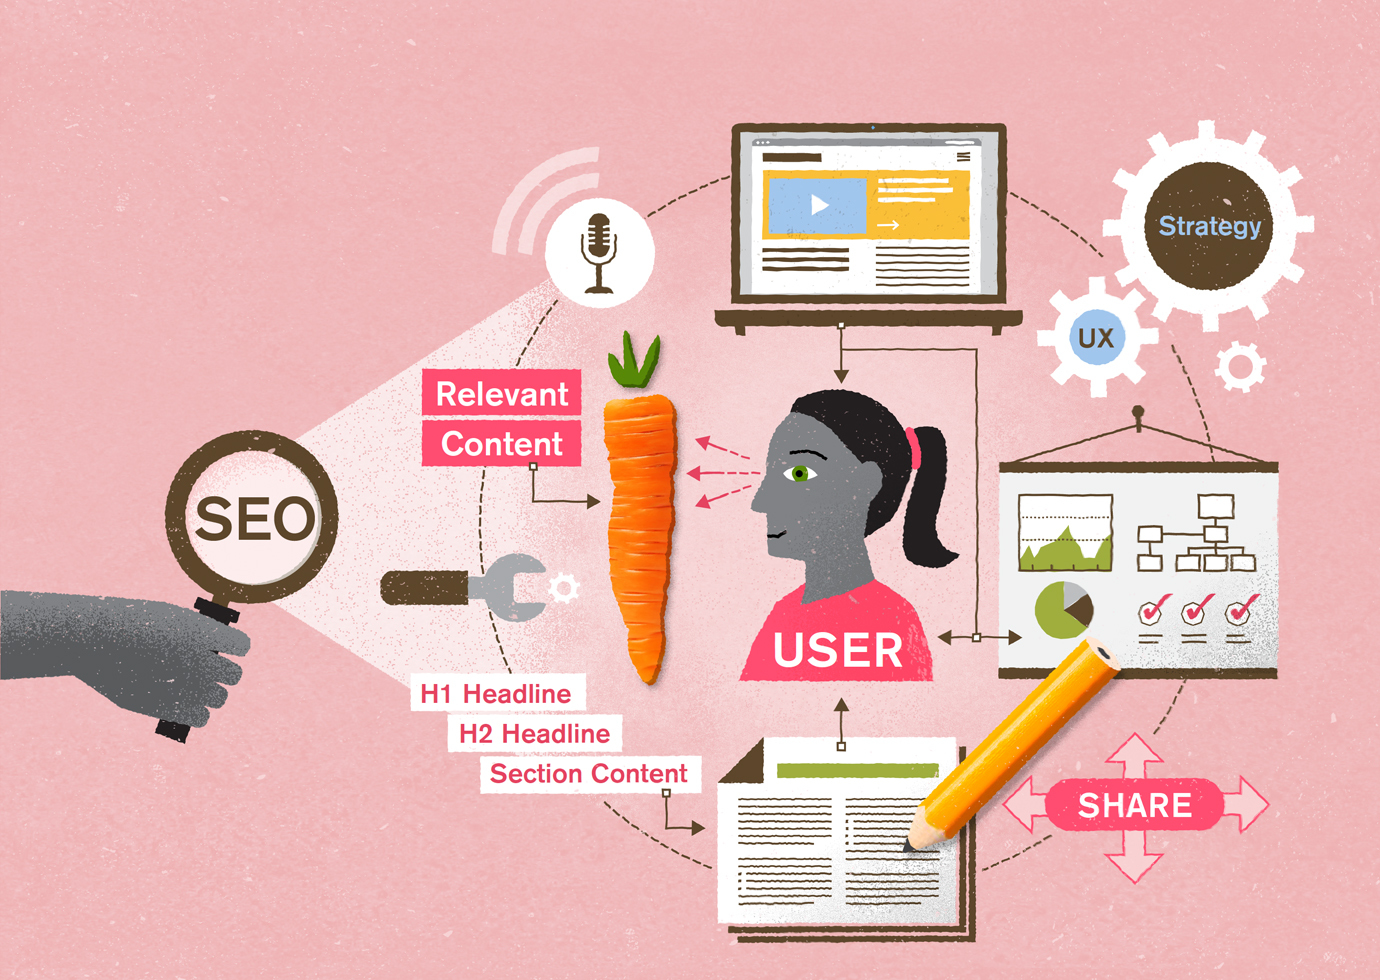 Illustration showing a person inspecting various SEO elements which contribute to a properly optimized website.